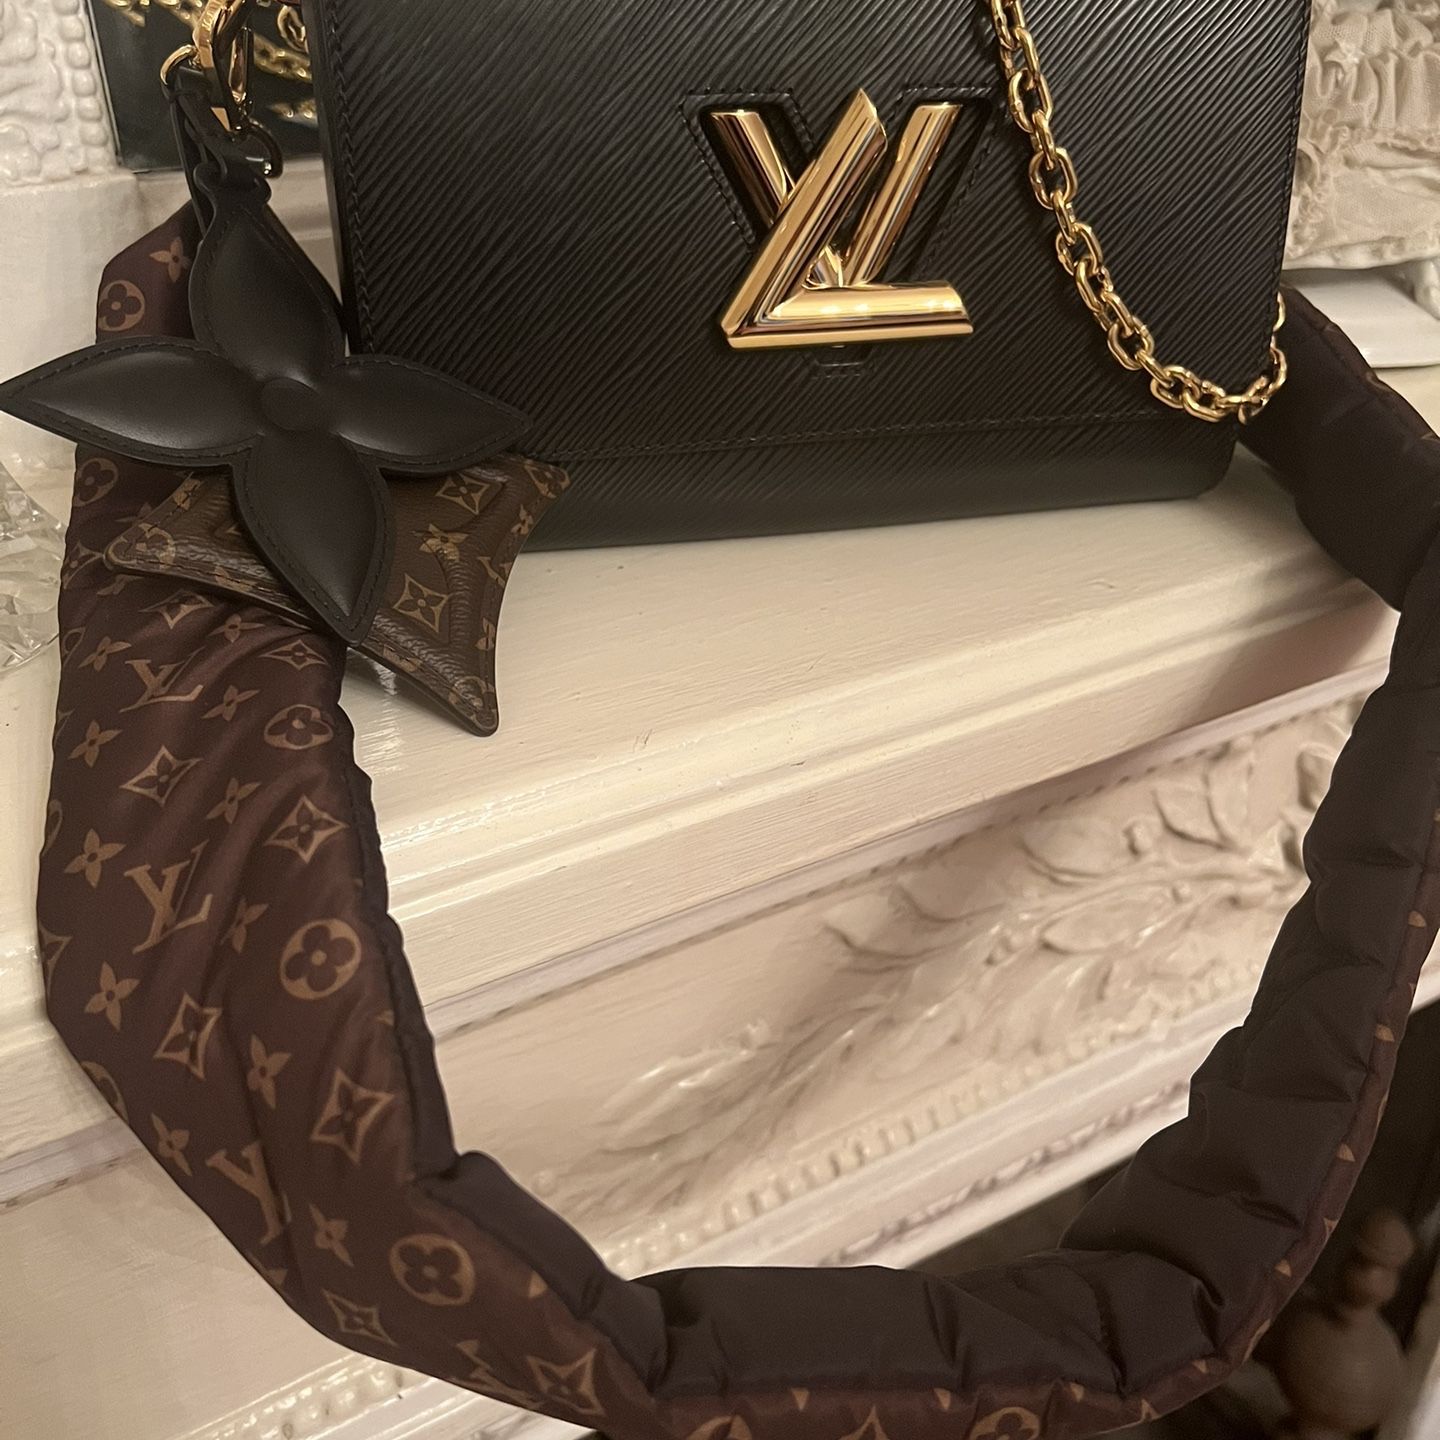 Louis Vuitton Twist PM blue Toledo Epi for Sale in Queens, NY - OfferUp